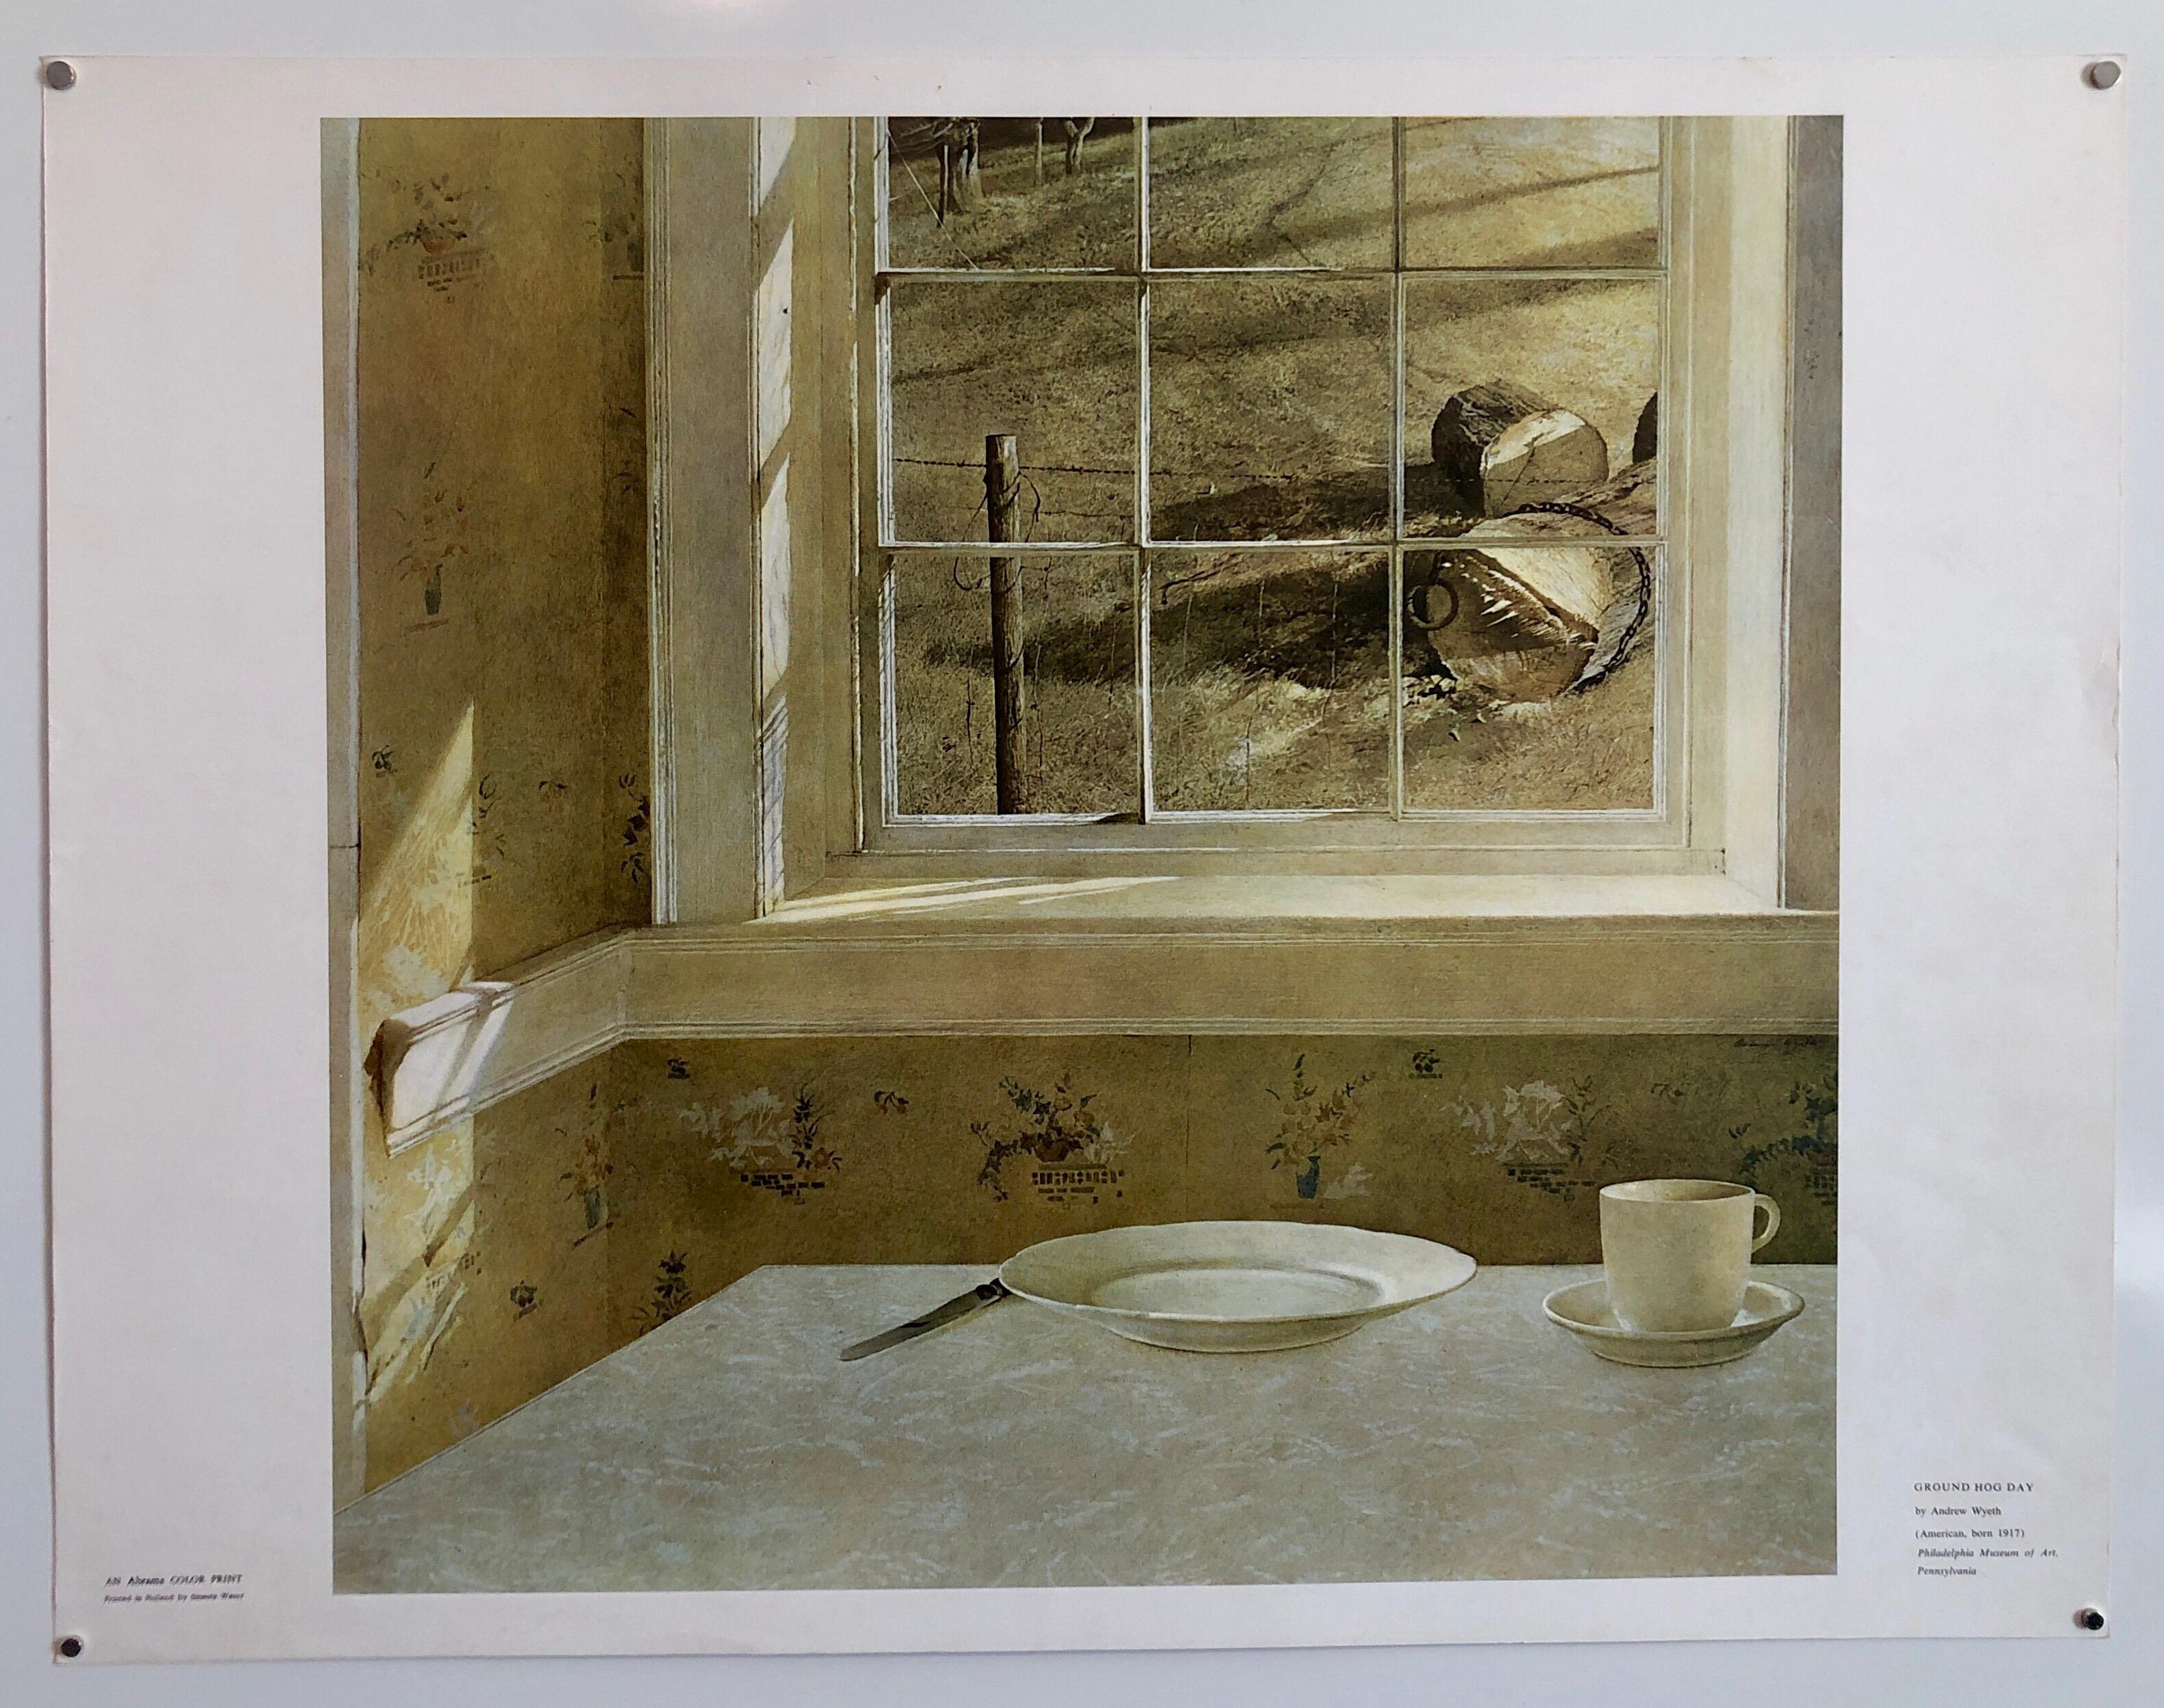 This is a vintage offset lithograph from an edition printed in Holland by Smeets Weert for Abrams Press. It is titled Ground Hog Day. it is an oil painting that is in the collection of the Philadelphia Museum of Art. 
Andrew Wyeth was born in Chadds